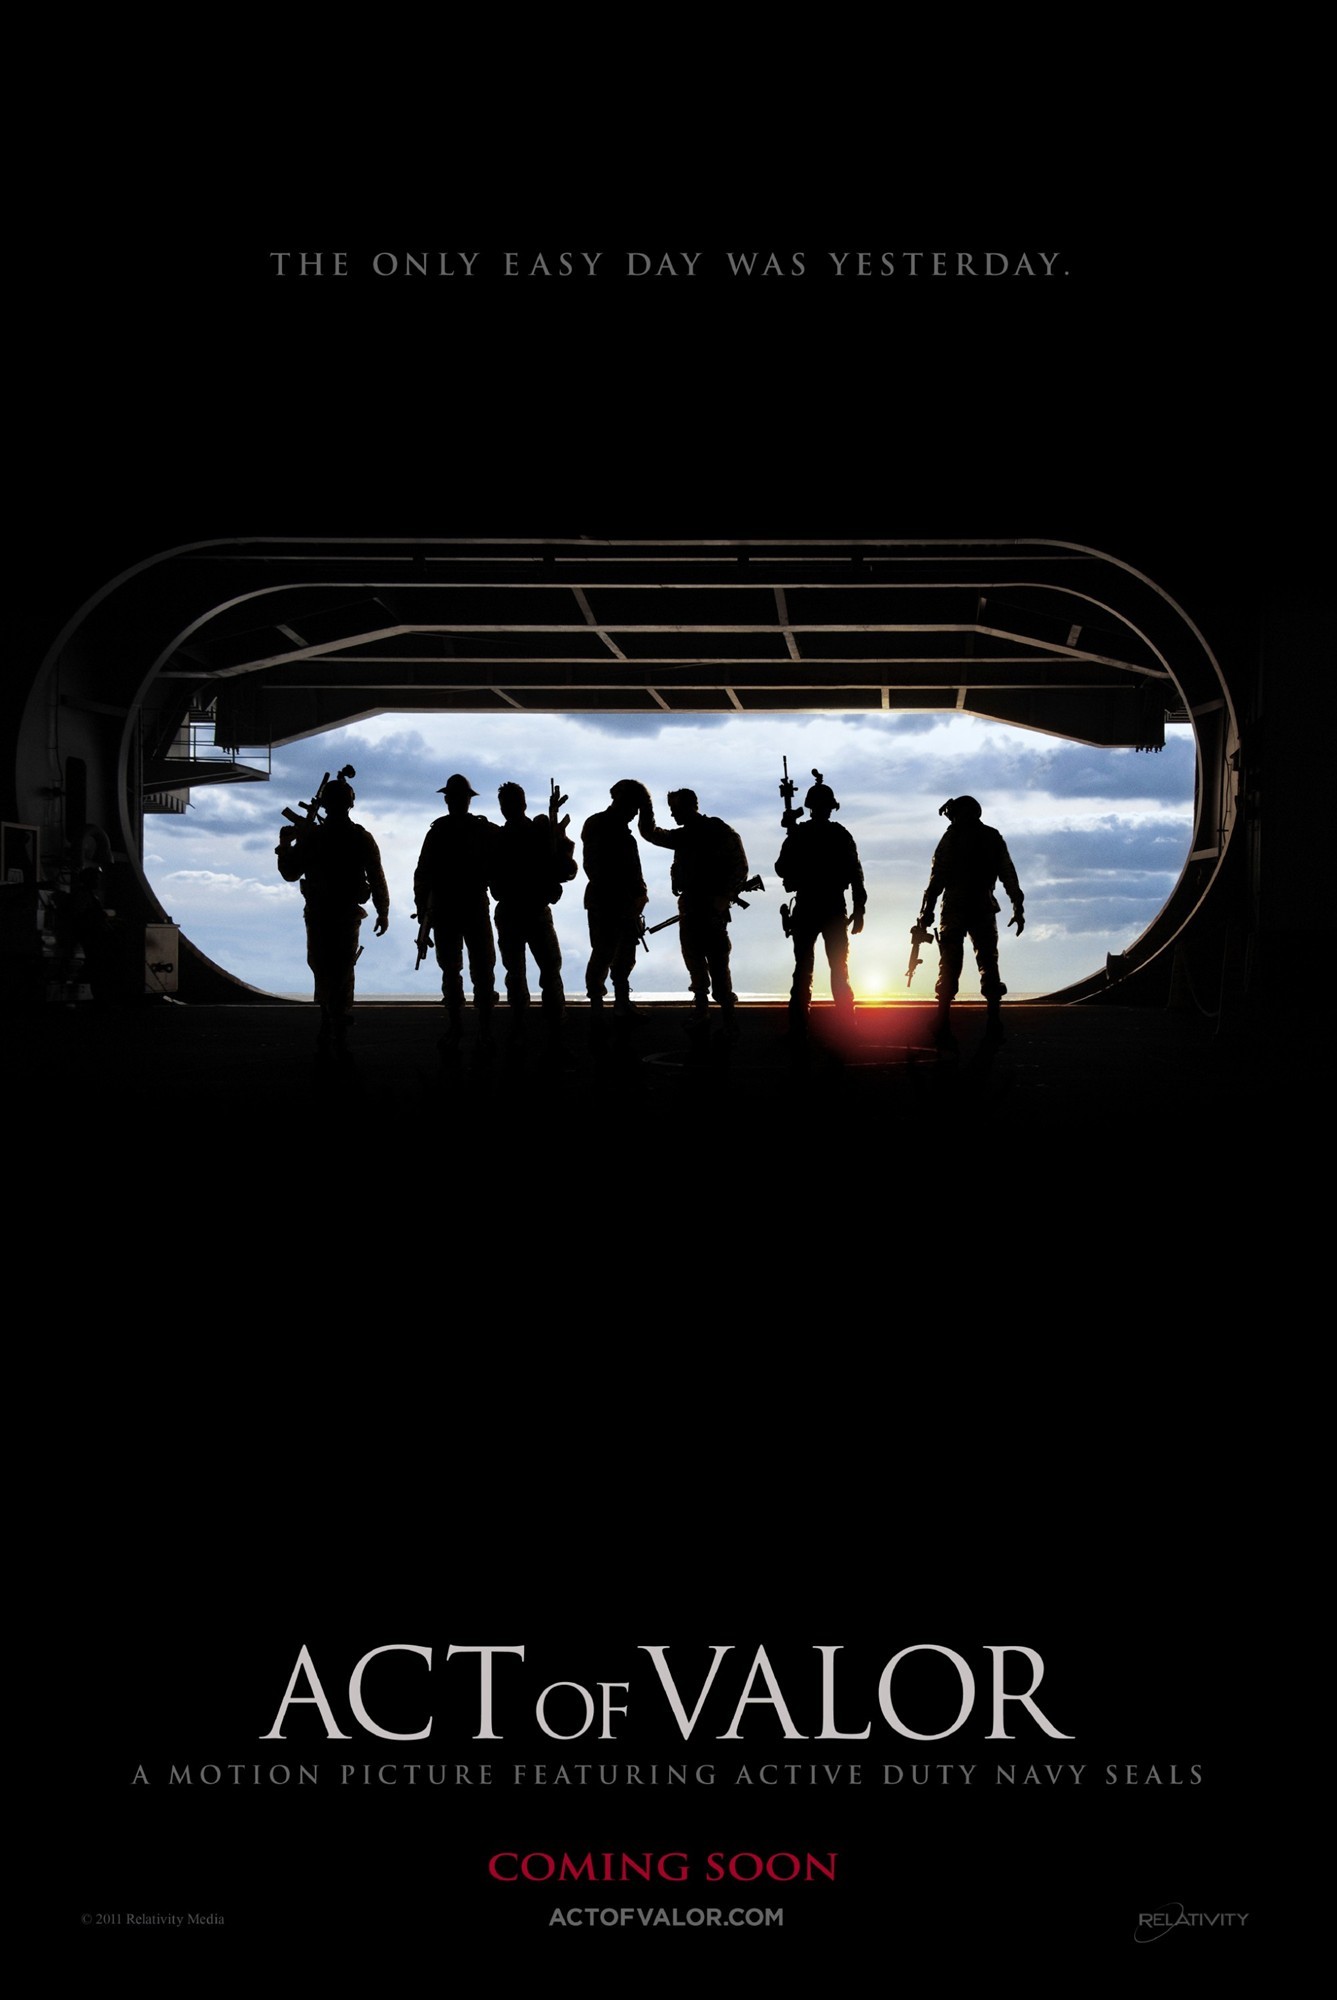 Poster of Relativity Media's Act of Valor (2012)